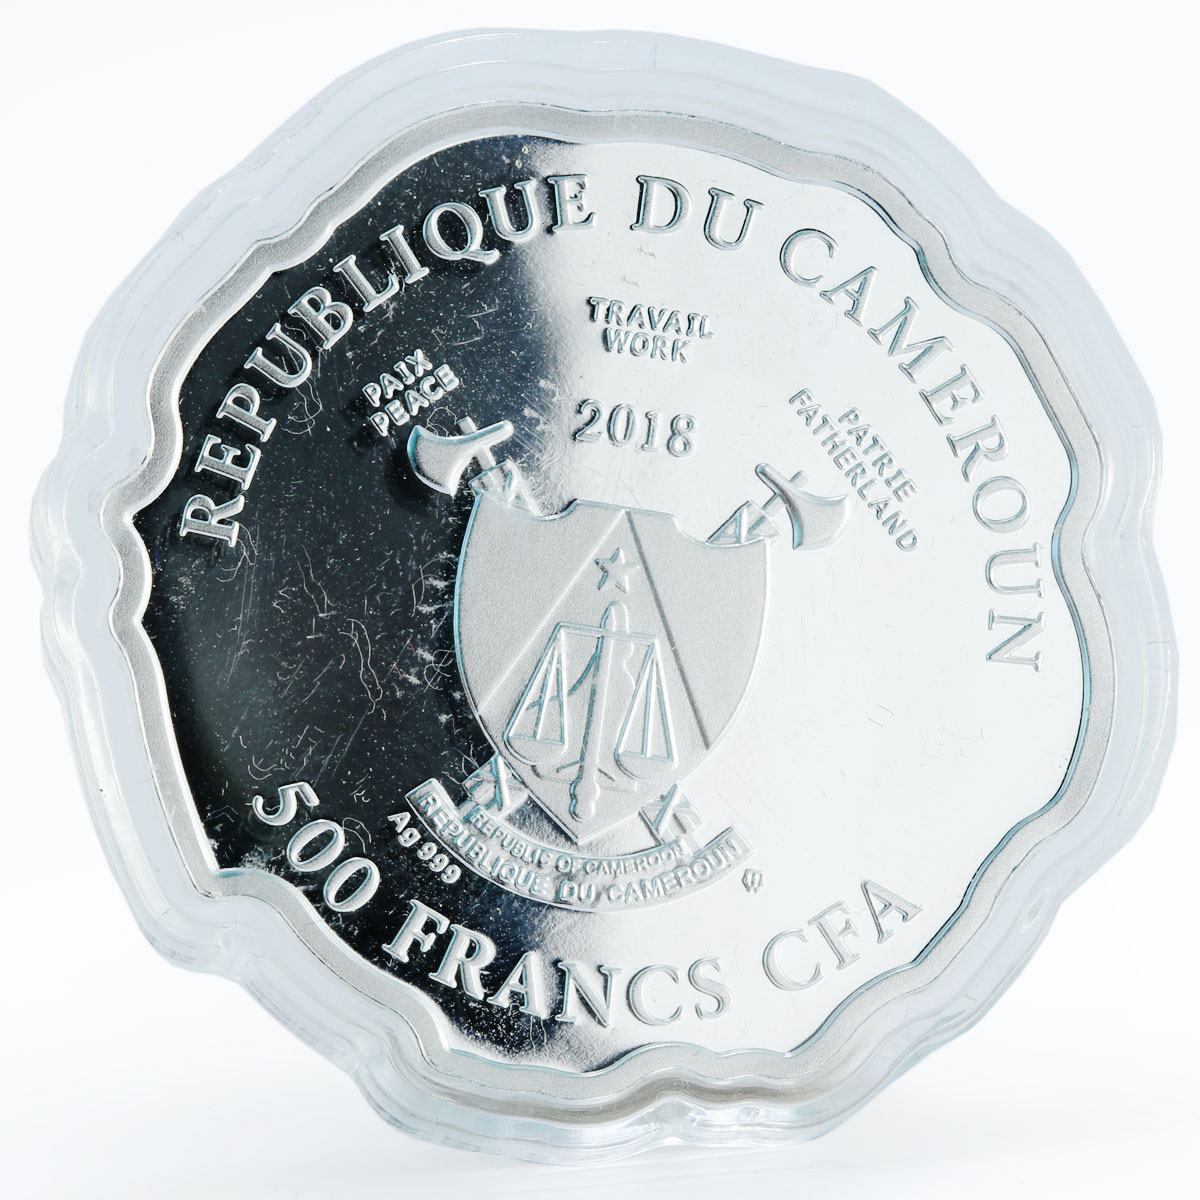 Cameroon 500 francs Born to be Happy newborn baby colored proof silver coin 2018